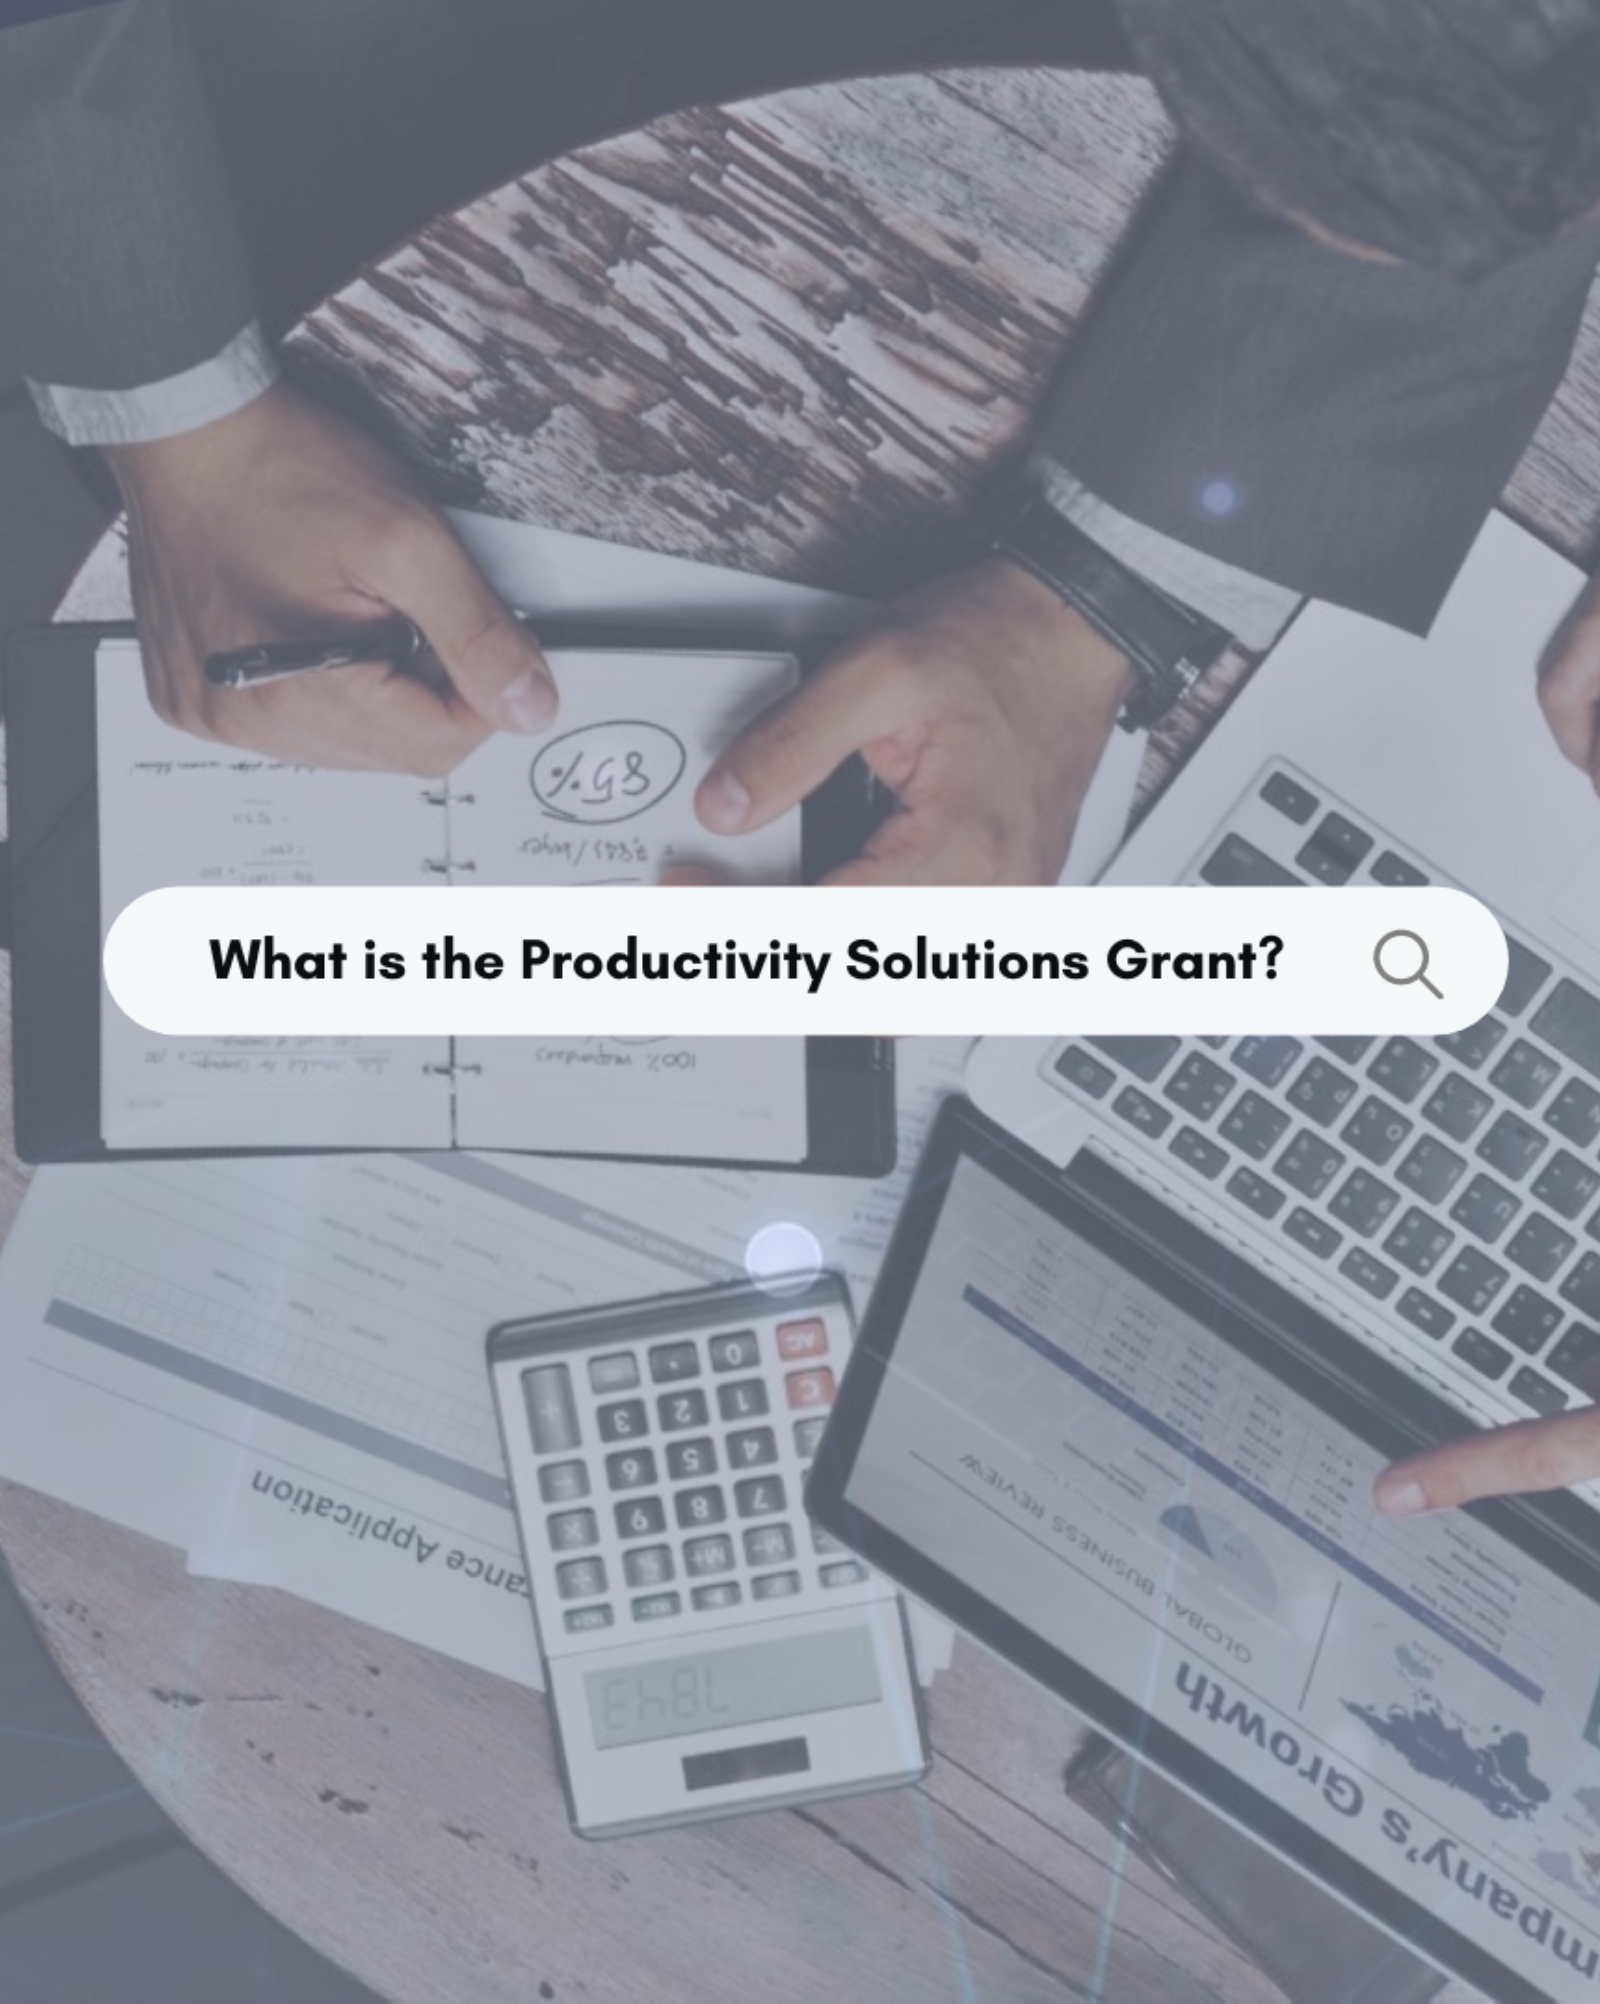 What is the Productivity Solutions Grant (PSG GRANT)?